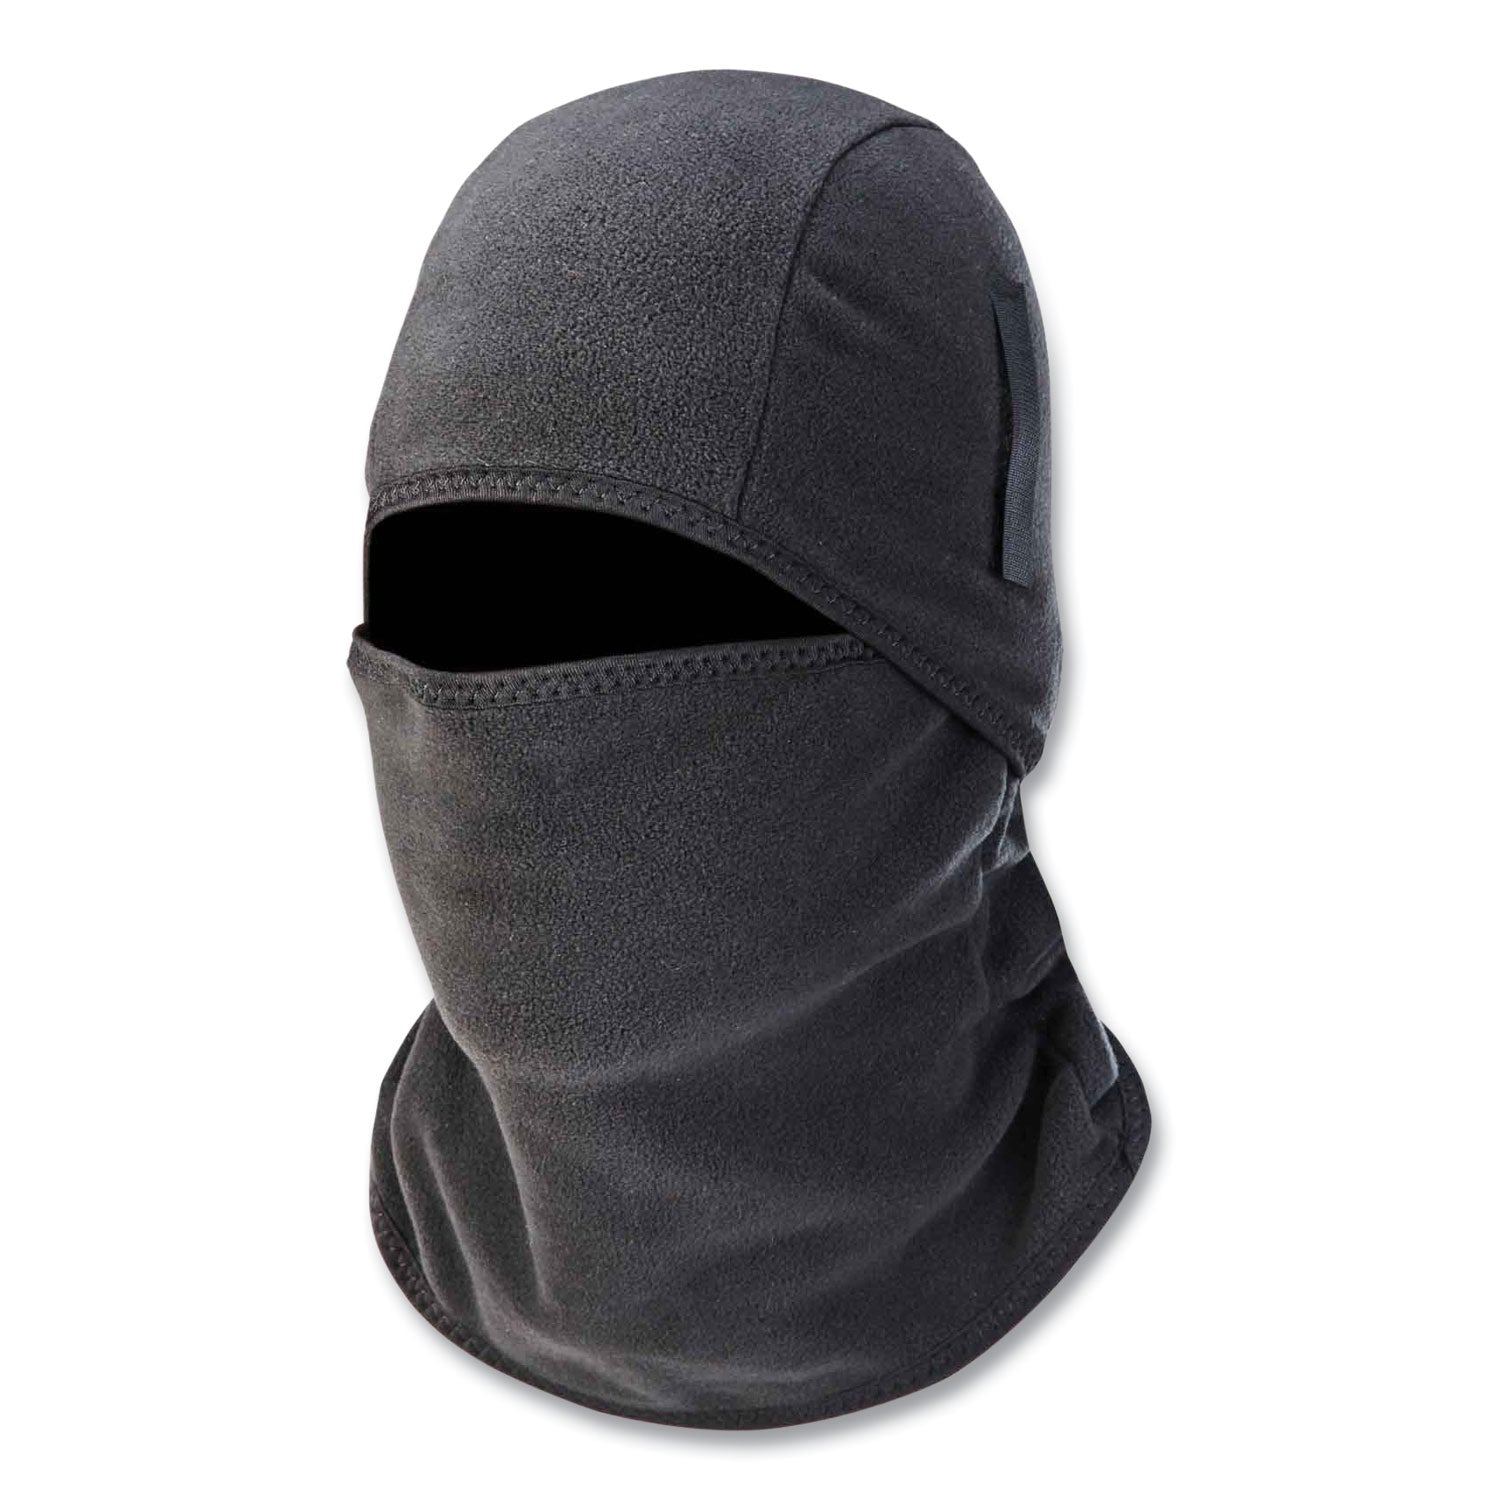 n-ferno-6826-2-piece-fleece-balaclava-face-mask-one-size-fits-most-black-ships-in-1-3-business-days_ego16826 - 1